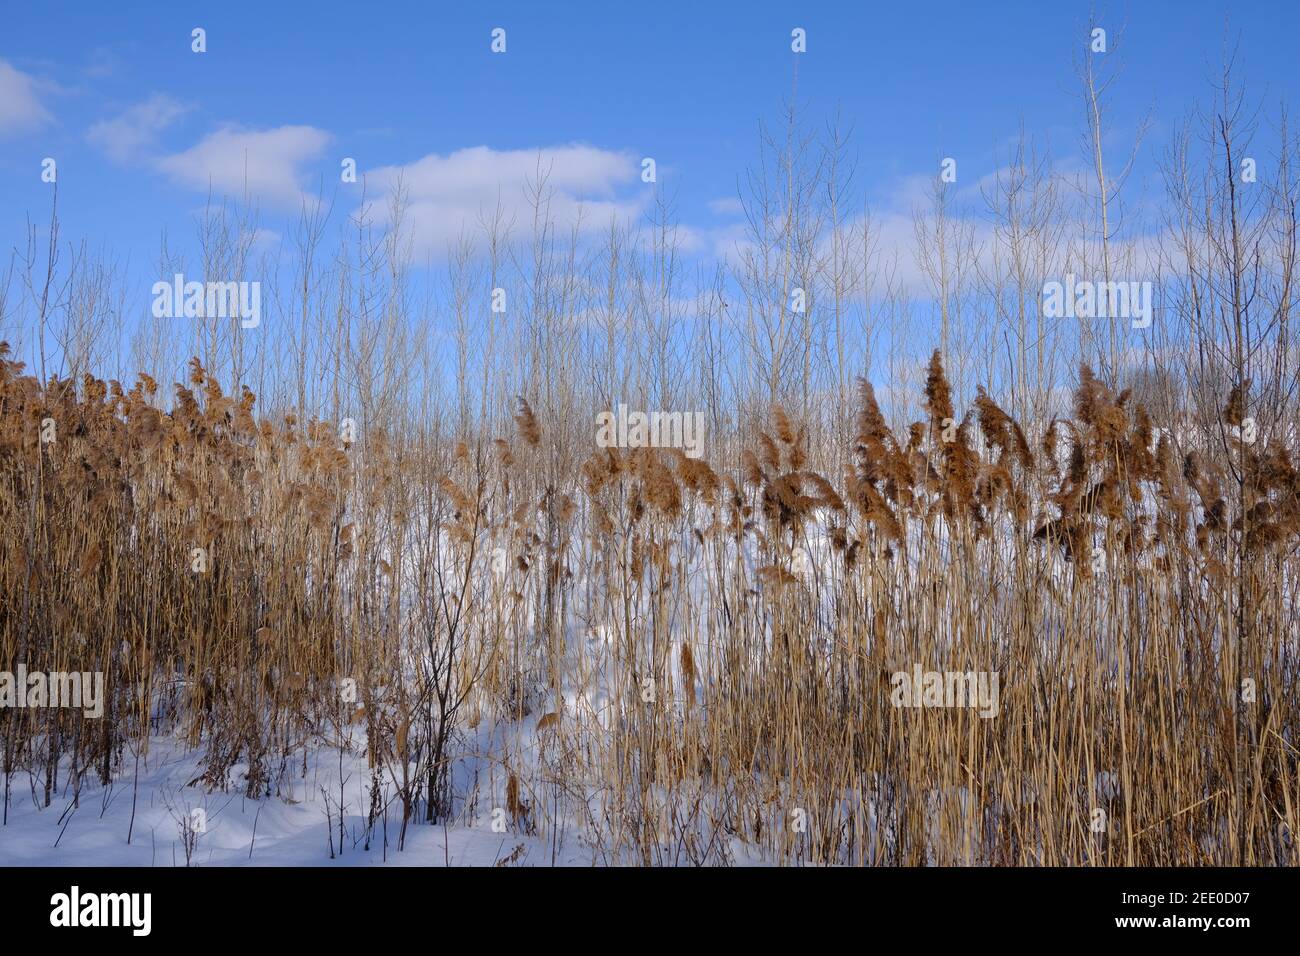 Tall, dried winter grasses (Phragmites australis) and young tree saplings on a snowy slope against a brilliant blue winter sky. Ottawa, Ontario, Canad. Stock Photo